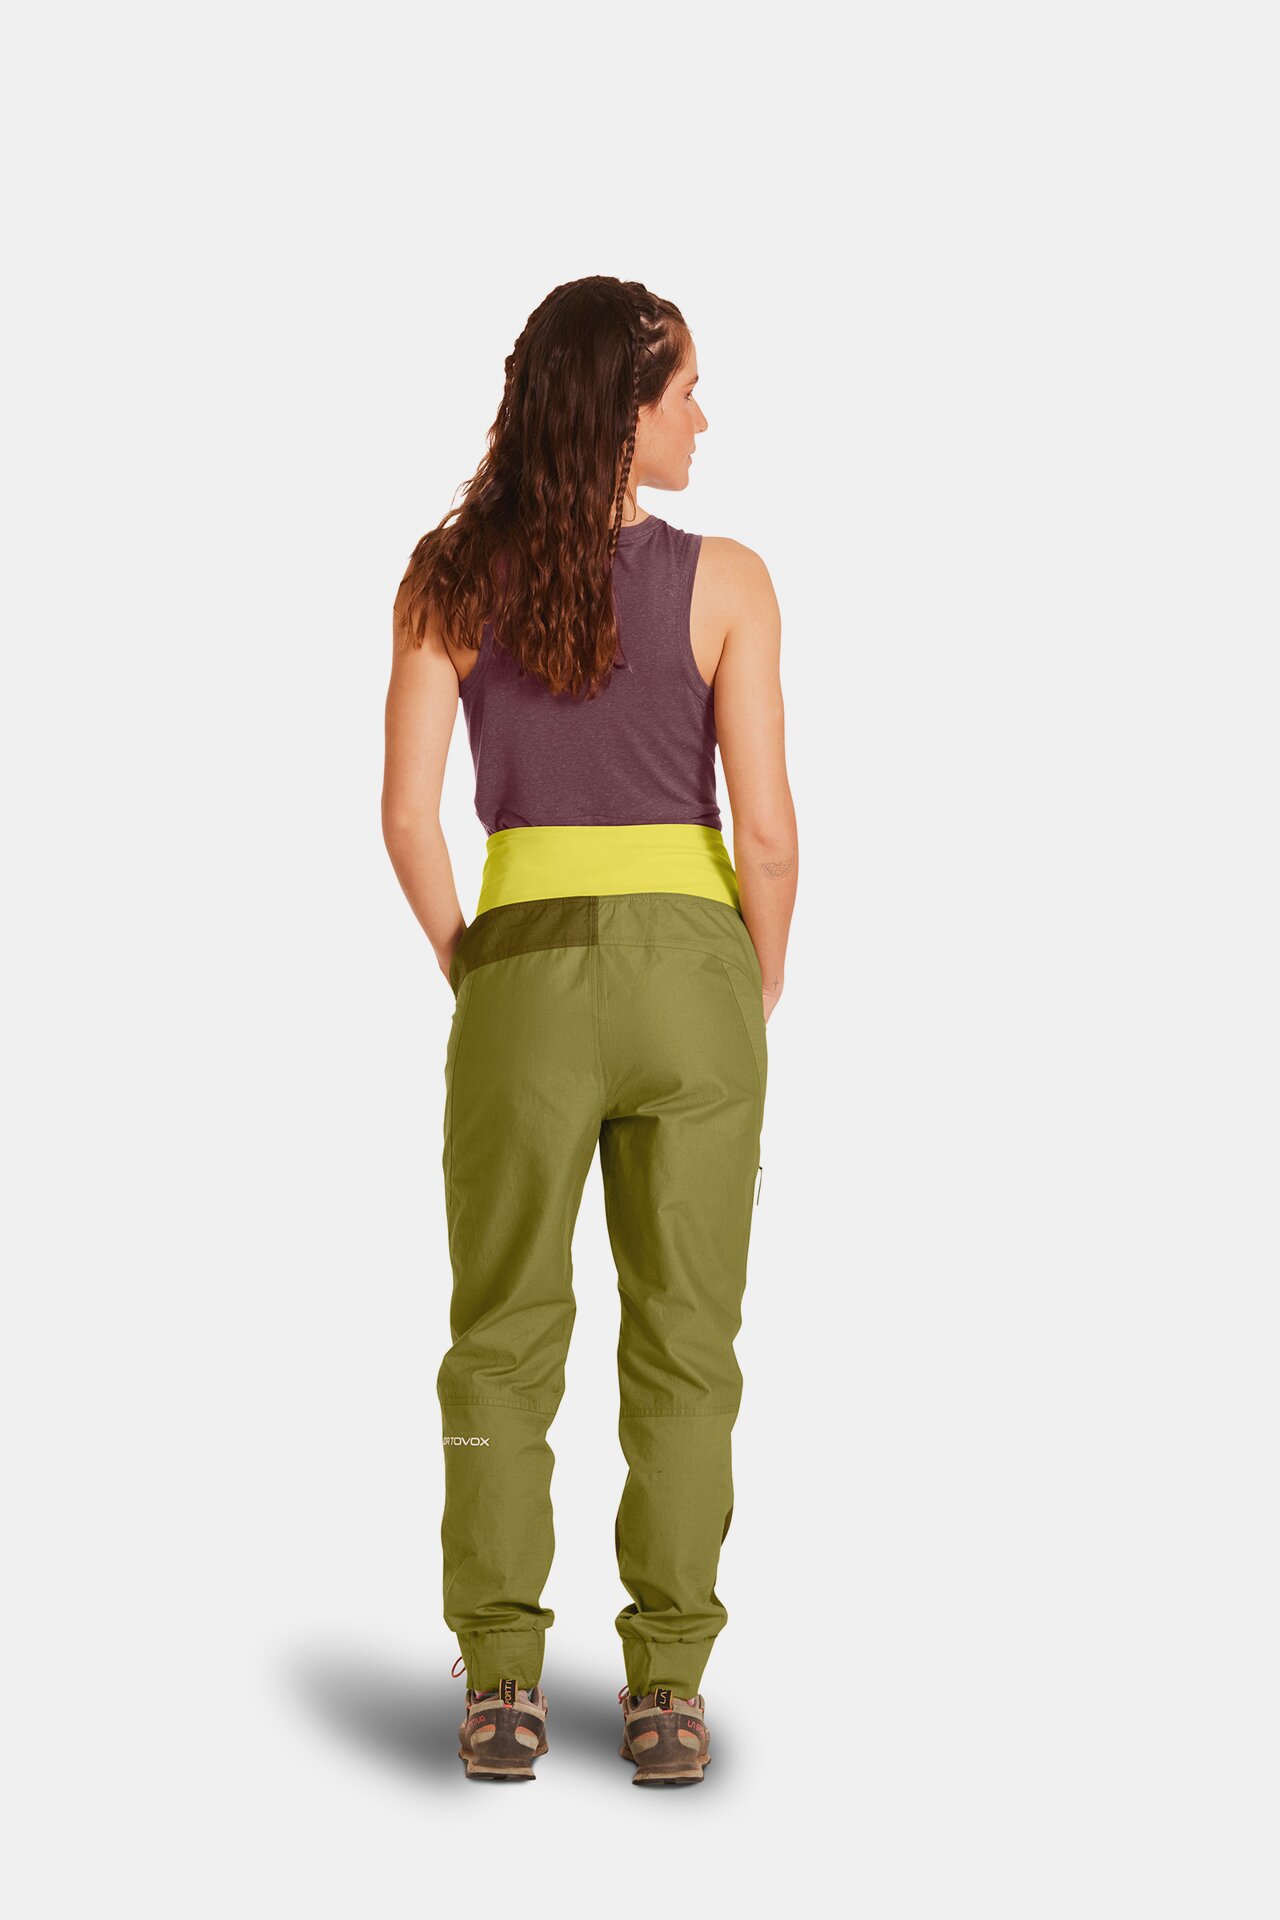 WMNS High Waistline Athletic Pants - See Through Knee Inserts / Zipper  Accents / Red